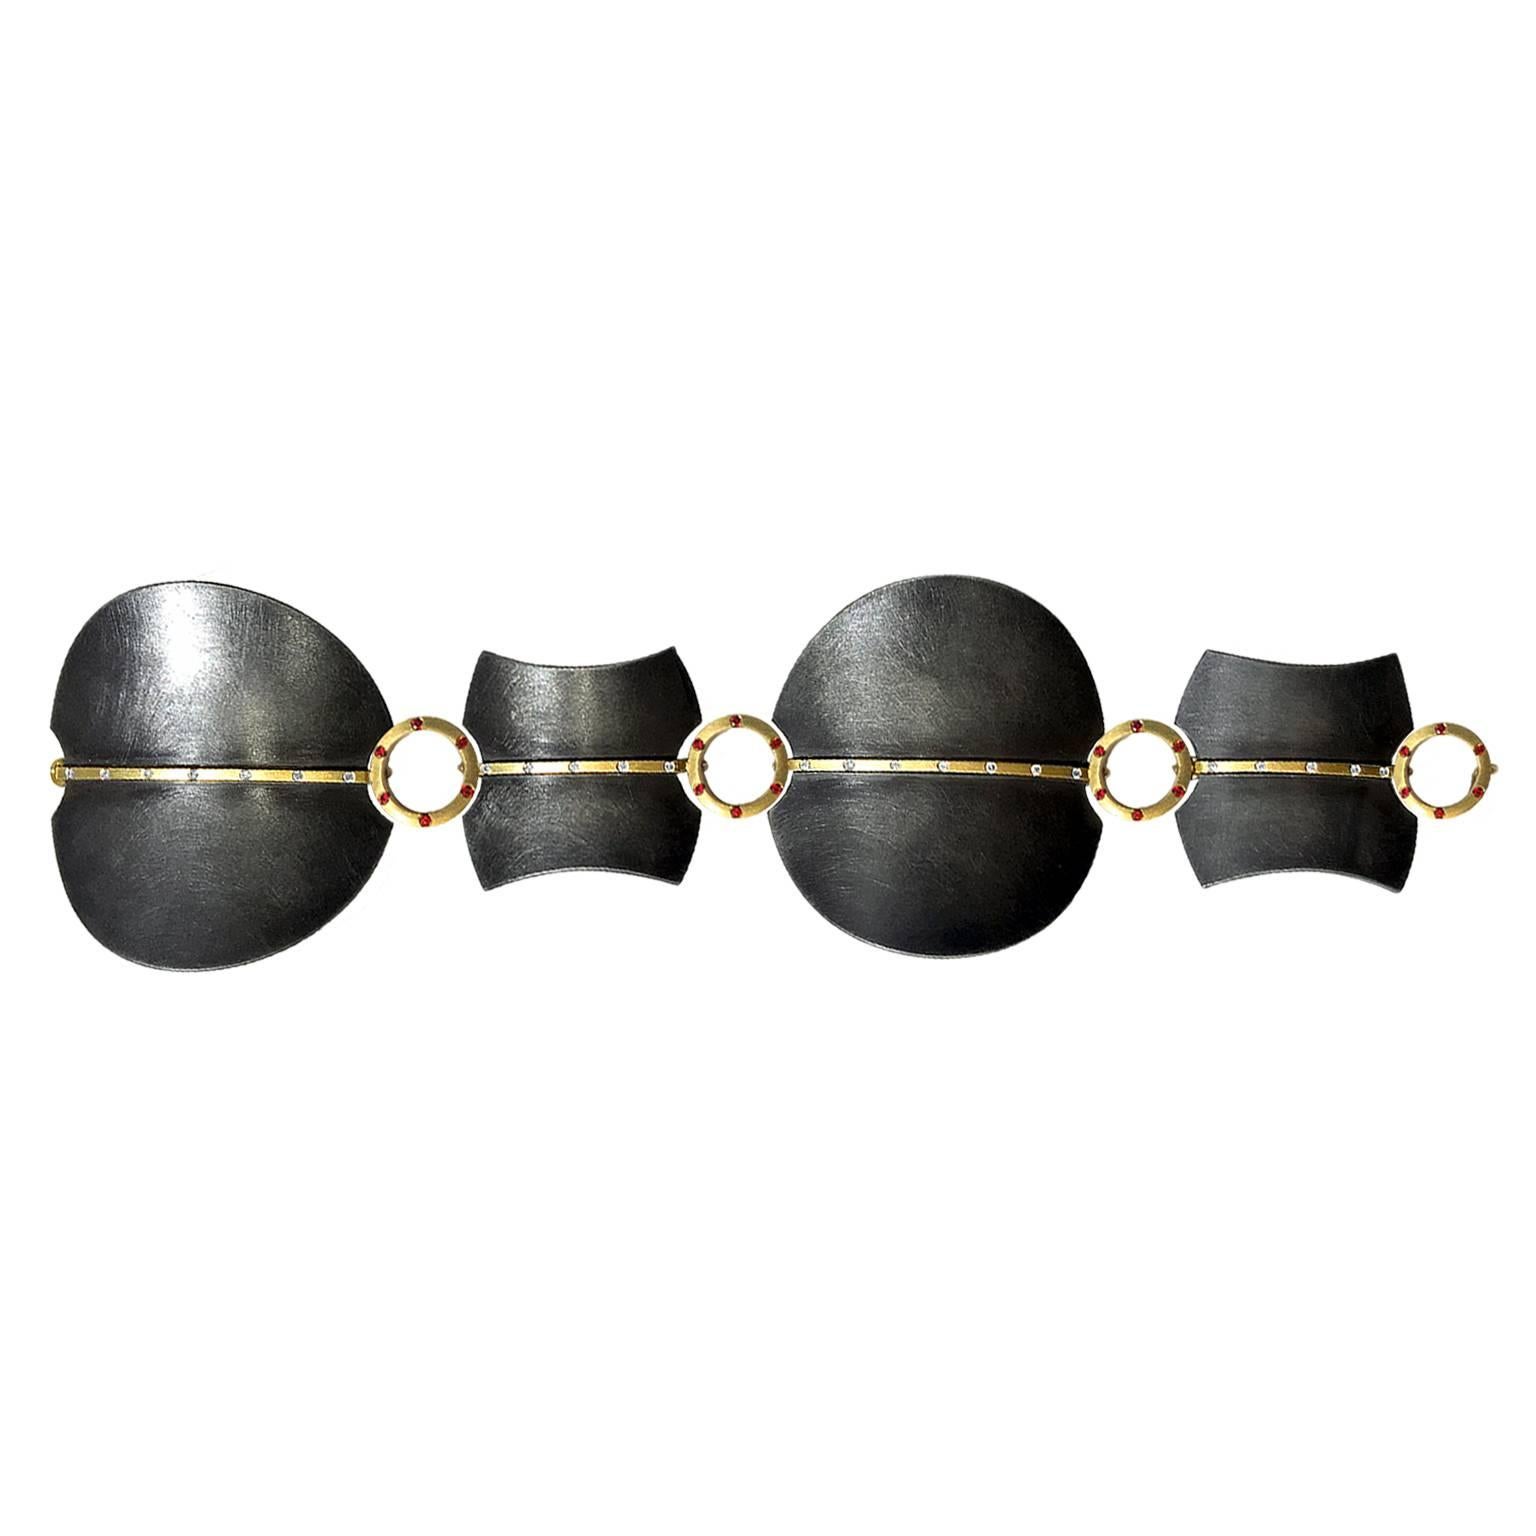 One of a Kind intricately detailed Umbra Bracelet by award winning jewelry artist Robin Waynee, handcrafted showcasing four matte-finished oxidized sterling silver elements accented by 18k yellow gold bars embedded with bezel-set round brilliant-cut